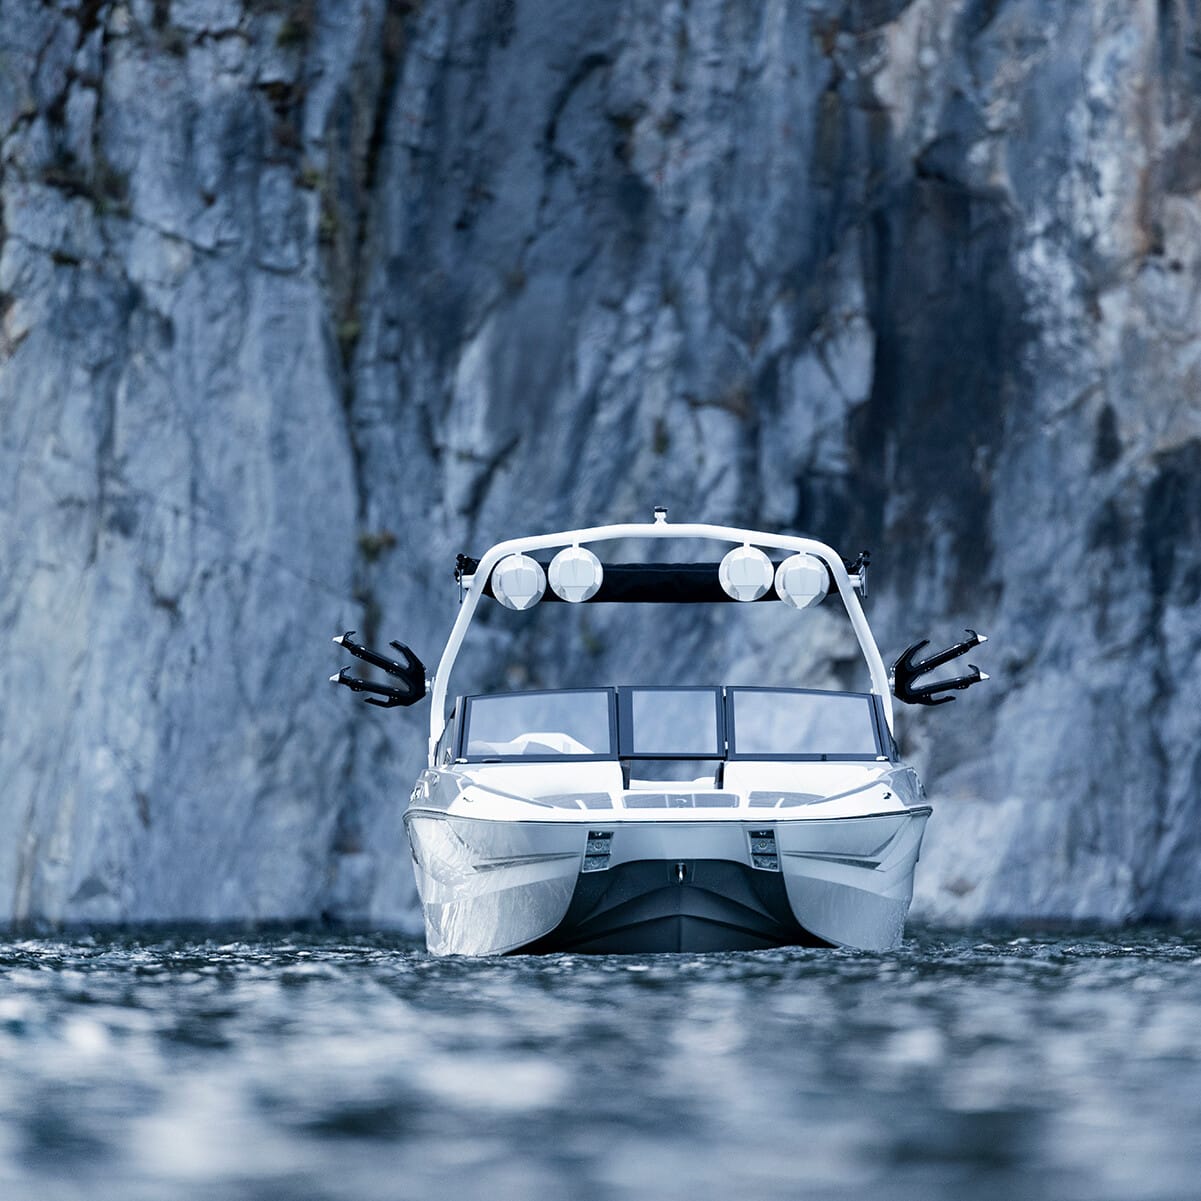 A white boat on the water, heading towards a rocky cliff face.